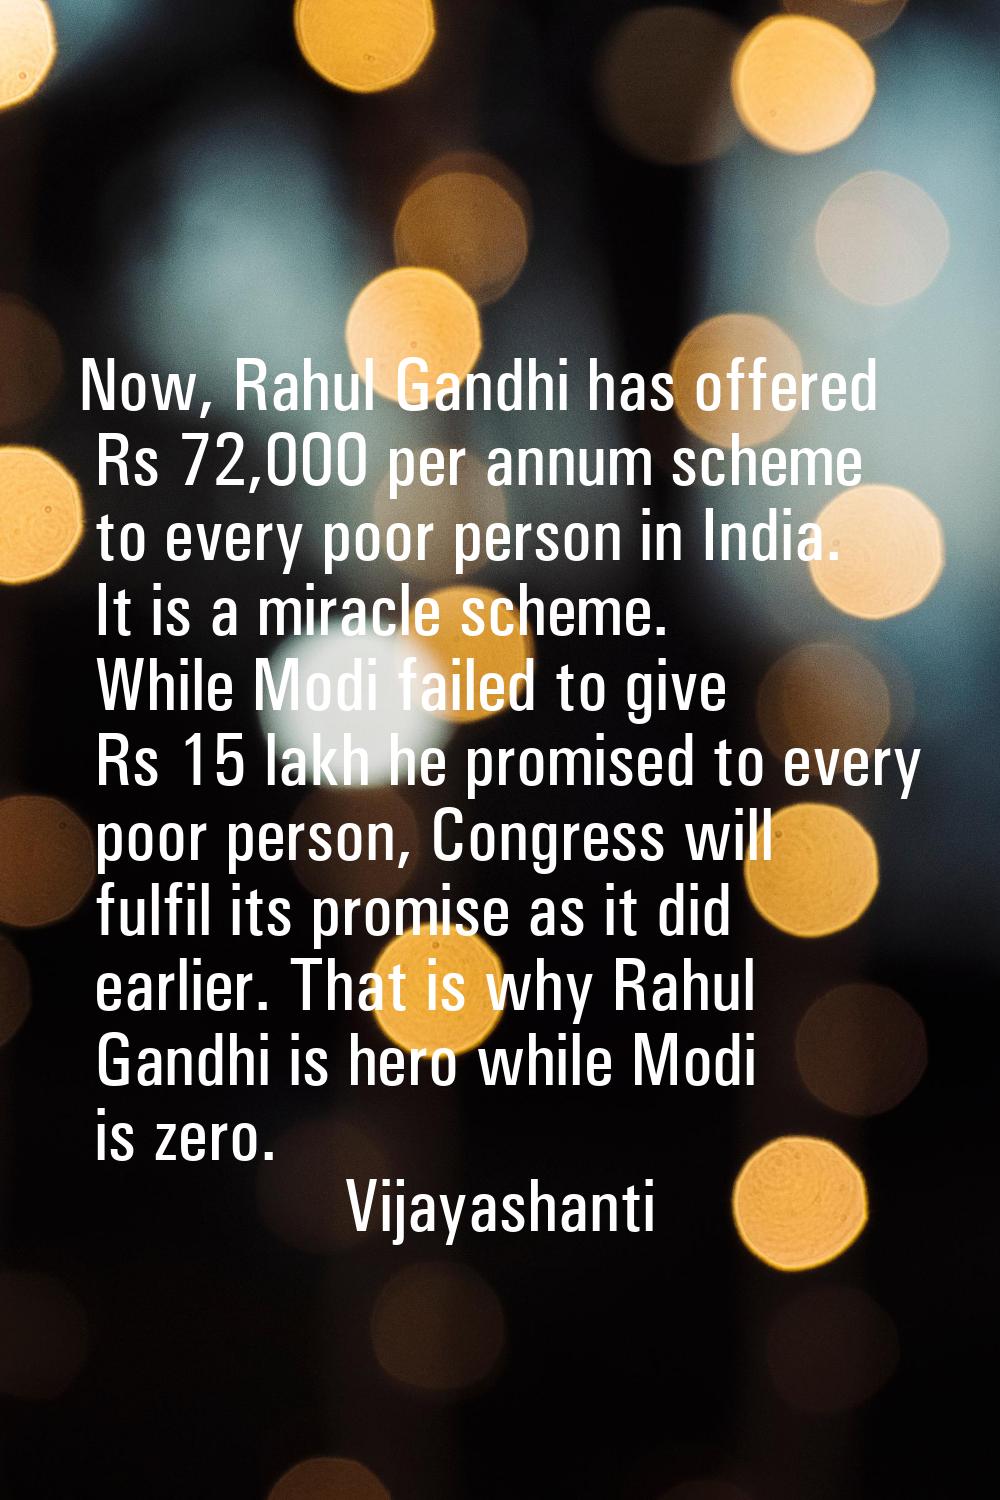 Now, Rahul Gandhi has offered Rs 72,000 per annum scheme to every poor person in India. It is a mir